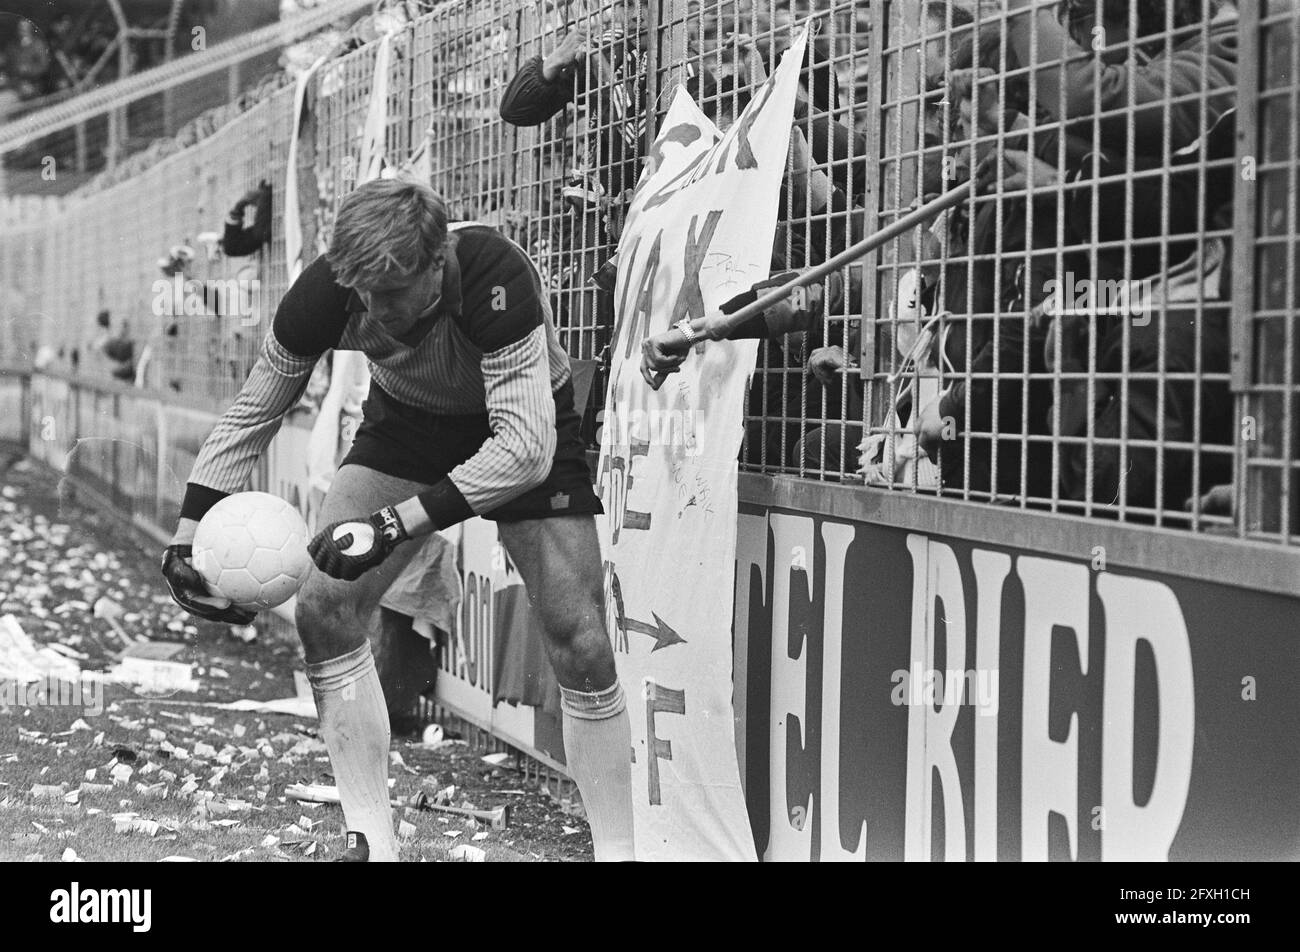 Soccer Ajax v FC Utrecht 1-0. Van Breukelen (goalkeeper) gets hit with stick by F-side when he took ball away from fence, 2 May 1982, goalkeepers, sports, soccer, The Netherlands, 20th century press agency photo, news to remember, documentary, historic photography 1945-1990, visual stories, human history of the Twentieth Century, capturing moments in time Stock Photo